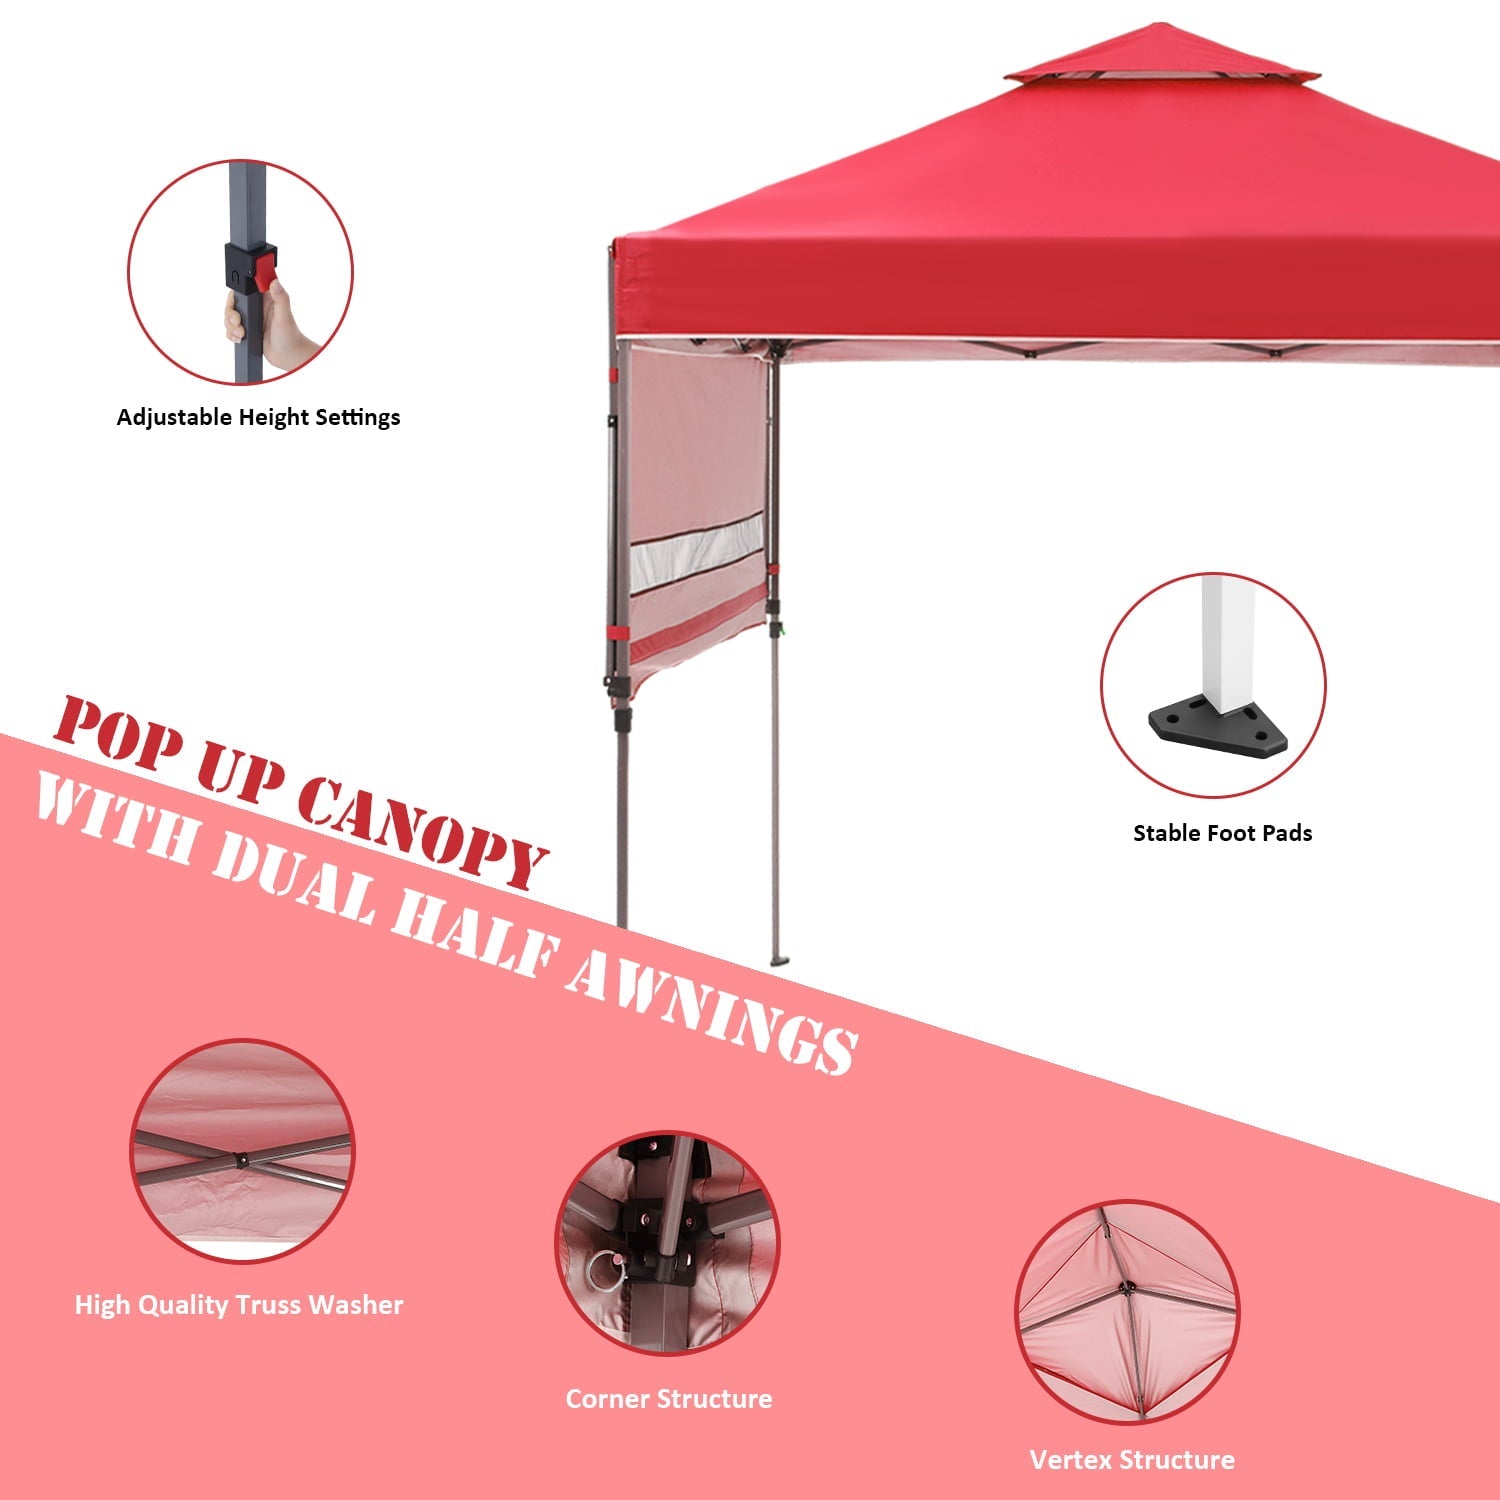 Outdoor Basic 10x17 Ft 2-Tier Pop Up Canopy Tent, Instant Canopy Shelter with Ventilation, Adjustable Dual Half Awnings and Wheeled Carrying Bag,Red